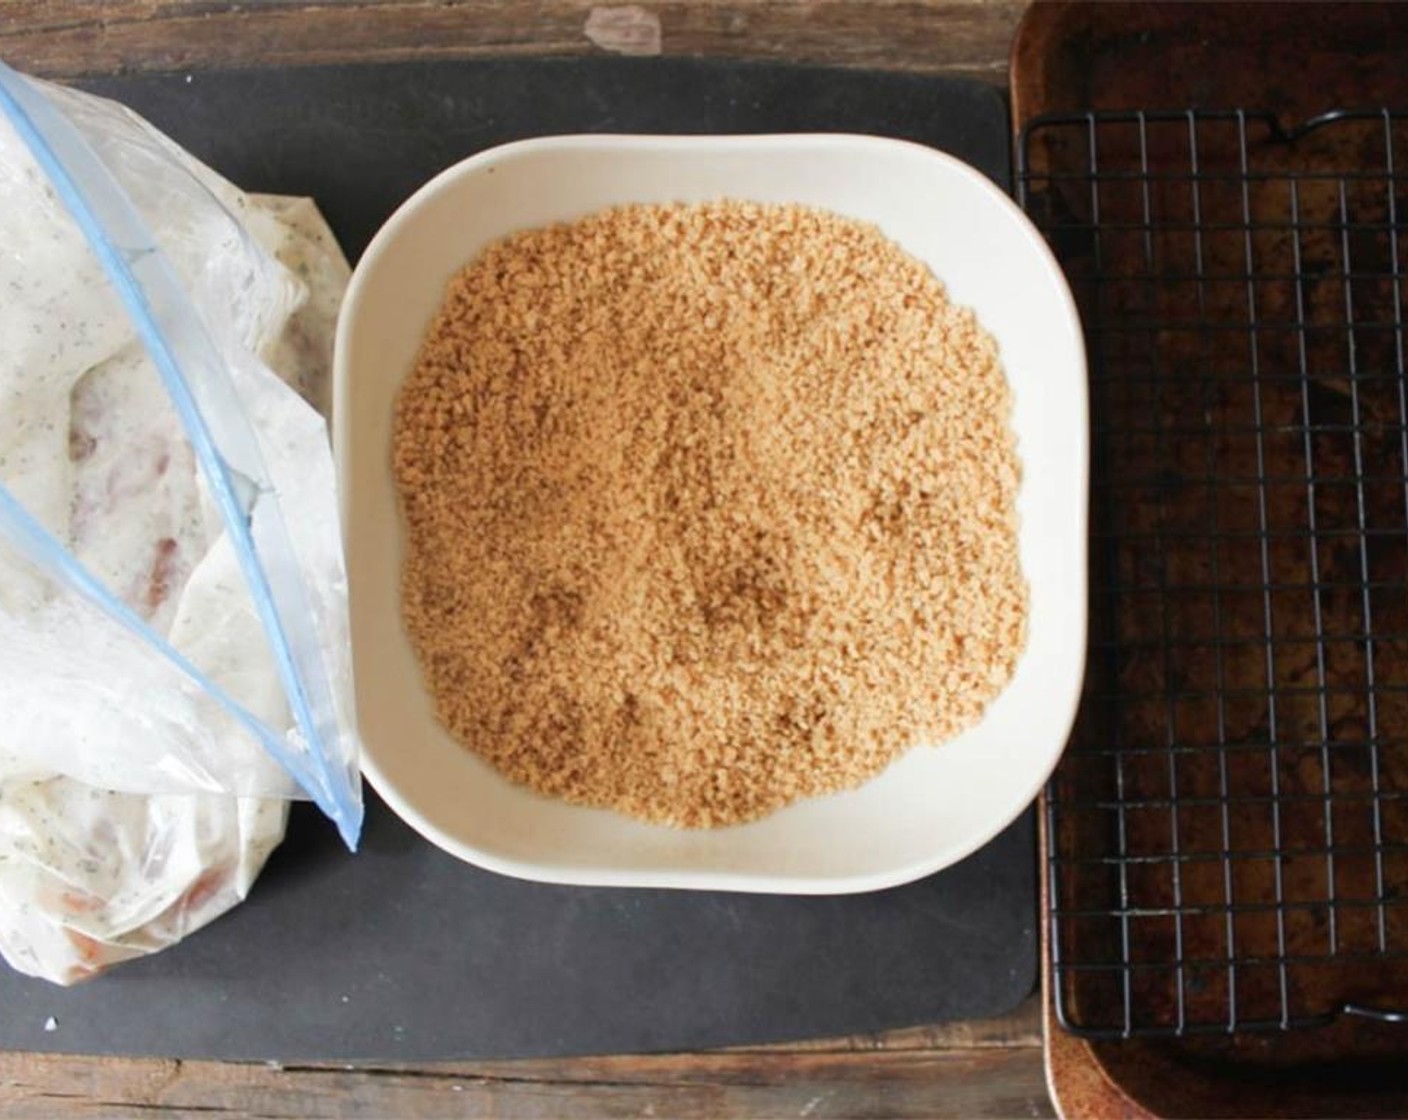 step 5 Place the Whole Wheat Panko Breadcrumbs (1 cup) in a shallow bowl with Kosher Salt (1/2 tsp).